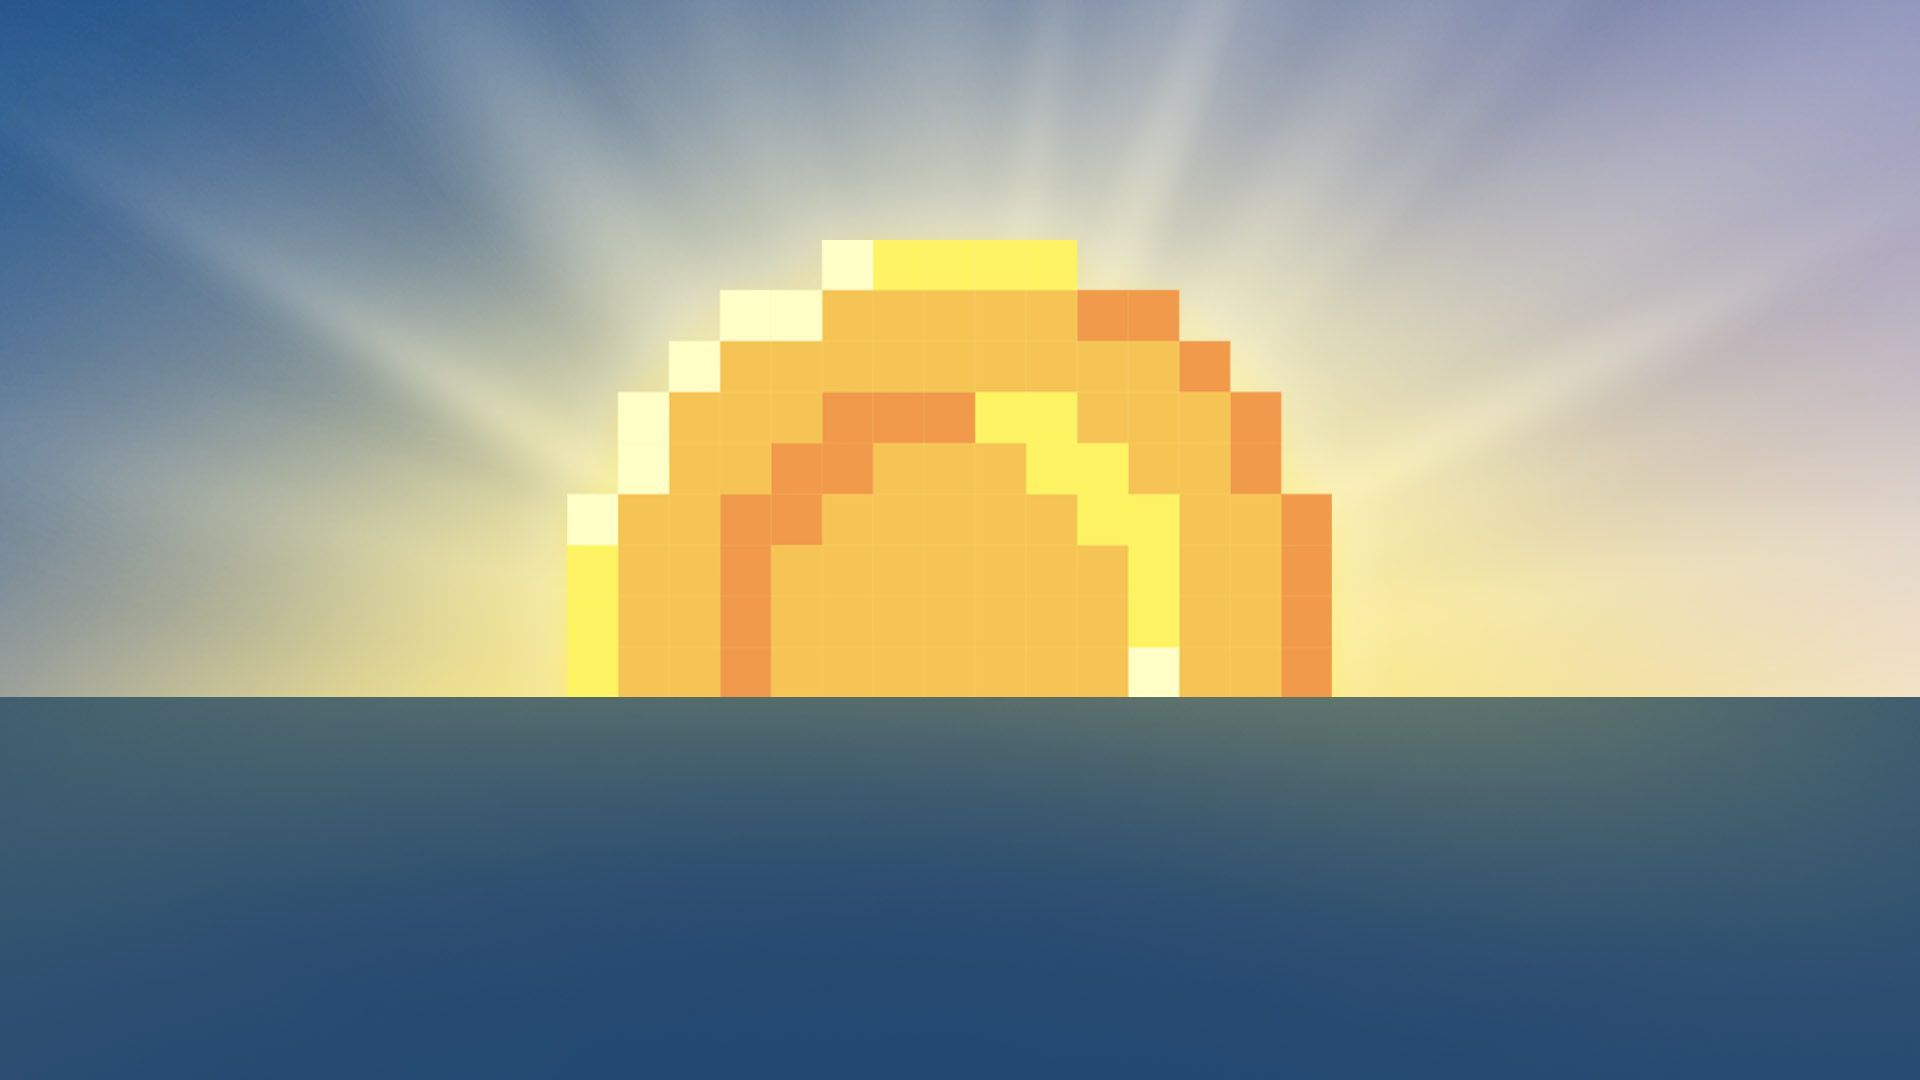 Illustration of a digital coin rising from the horizon with beams of light around it